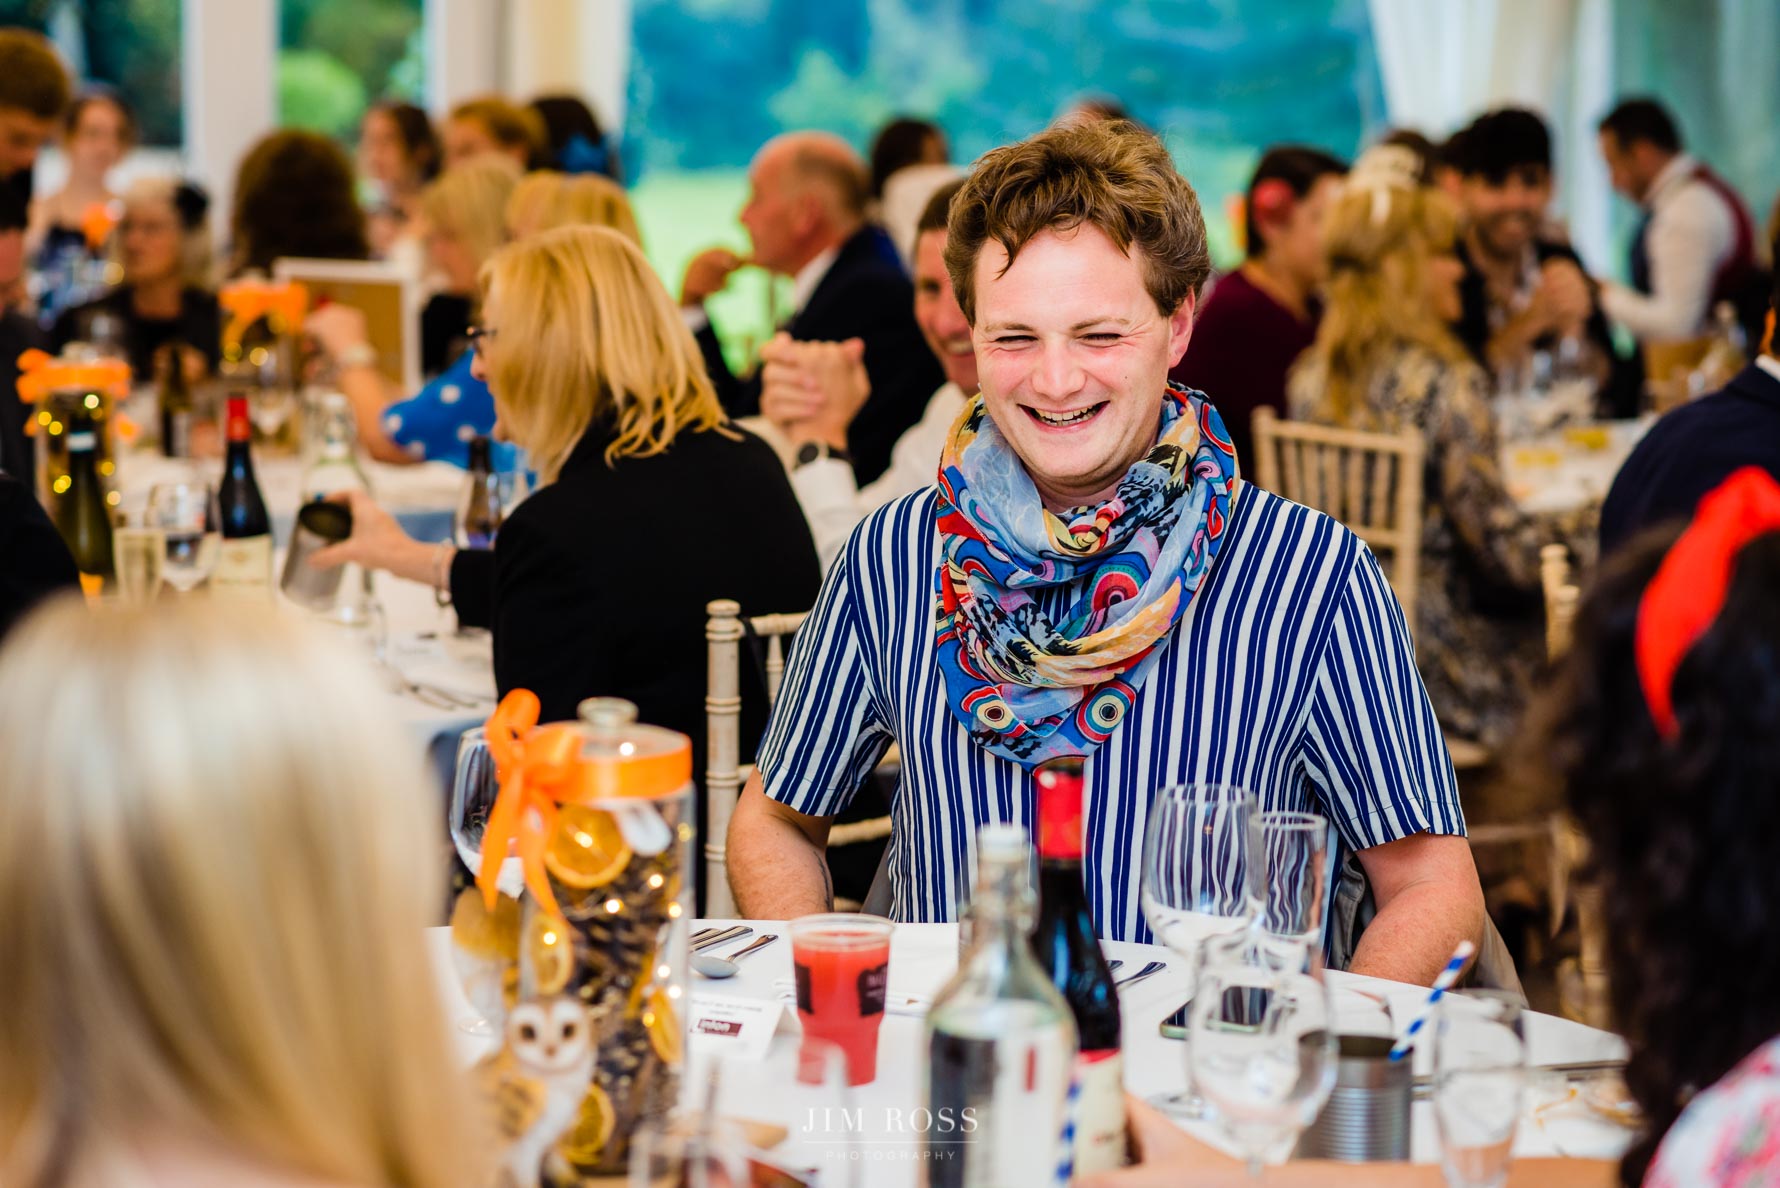 colourful wedding guest at table having a laugh